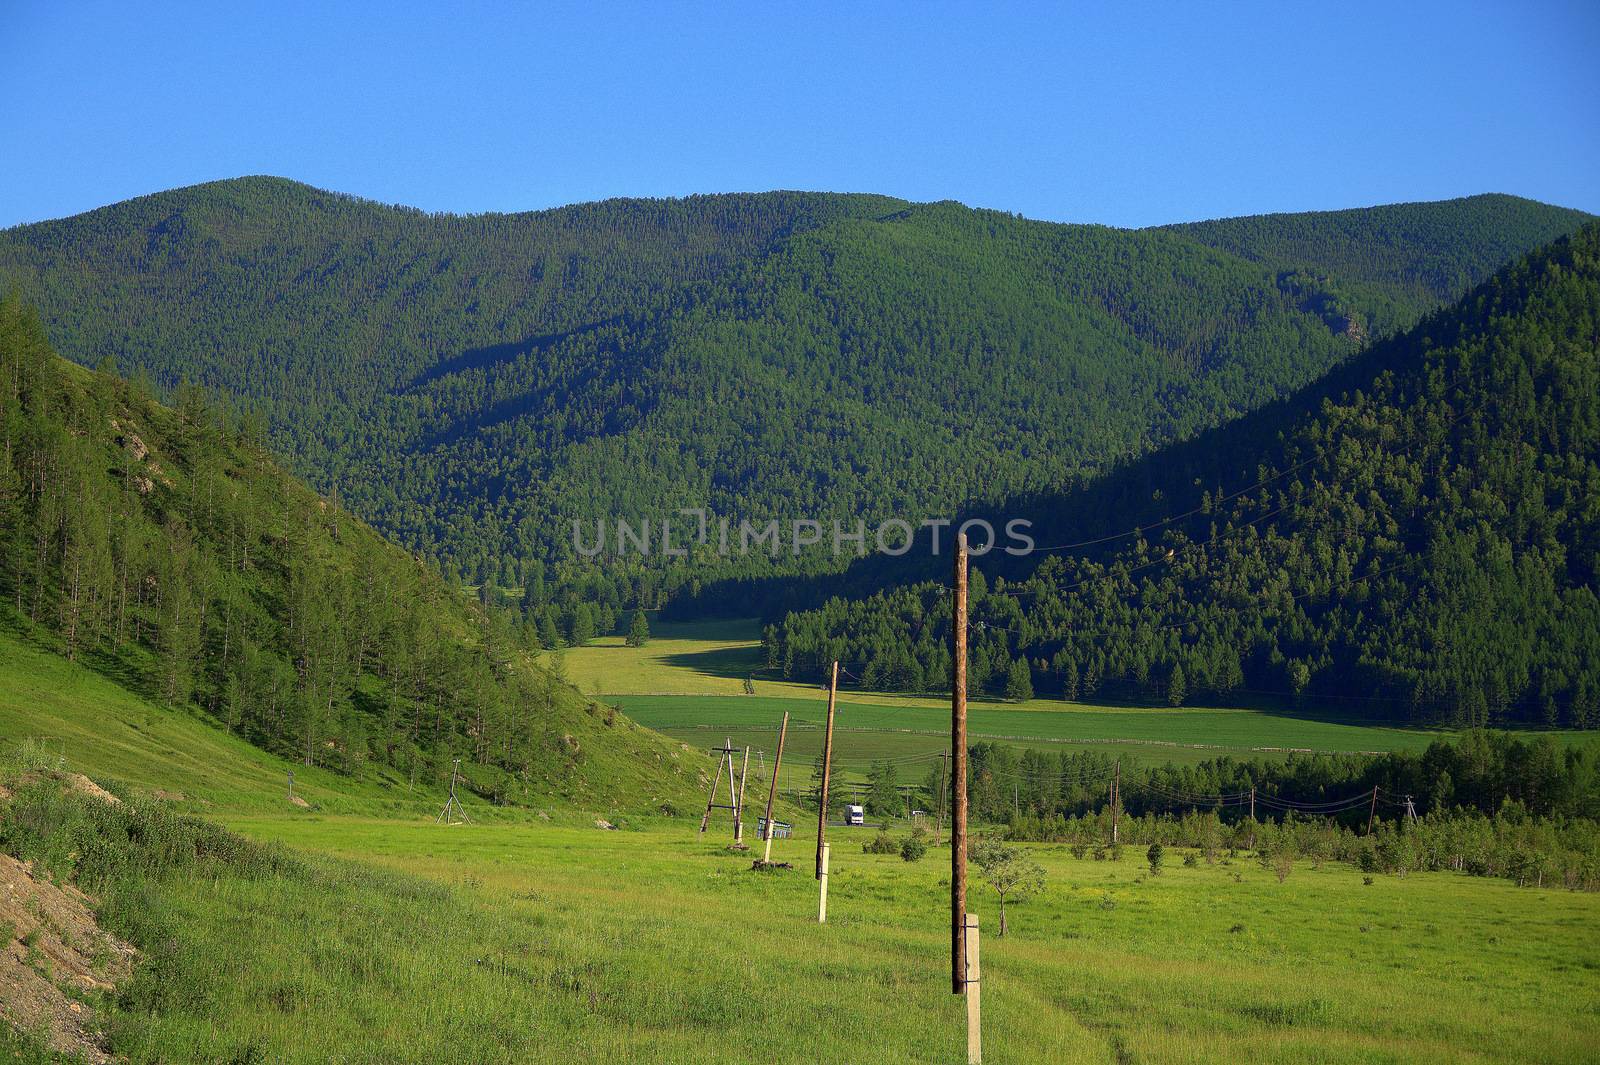 Wooden poles of the power line going through a fertile valley surrounded by mountains. Altai Siberia Russia.